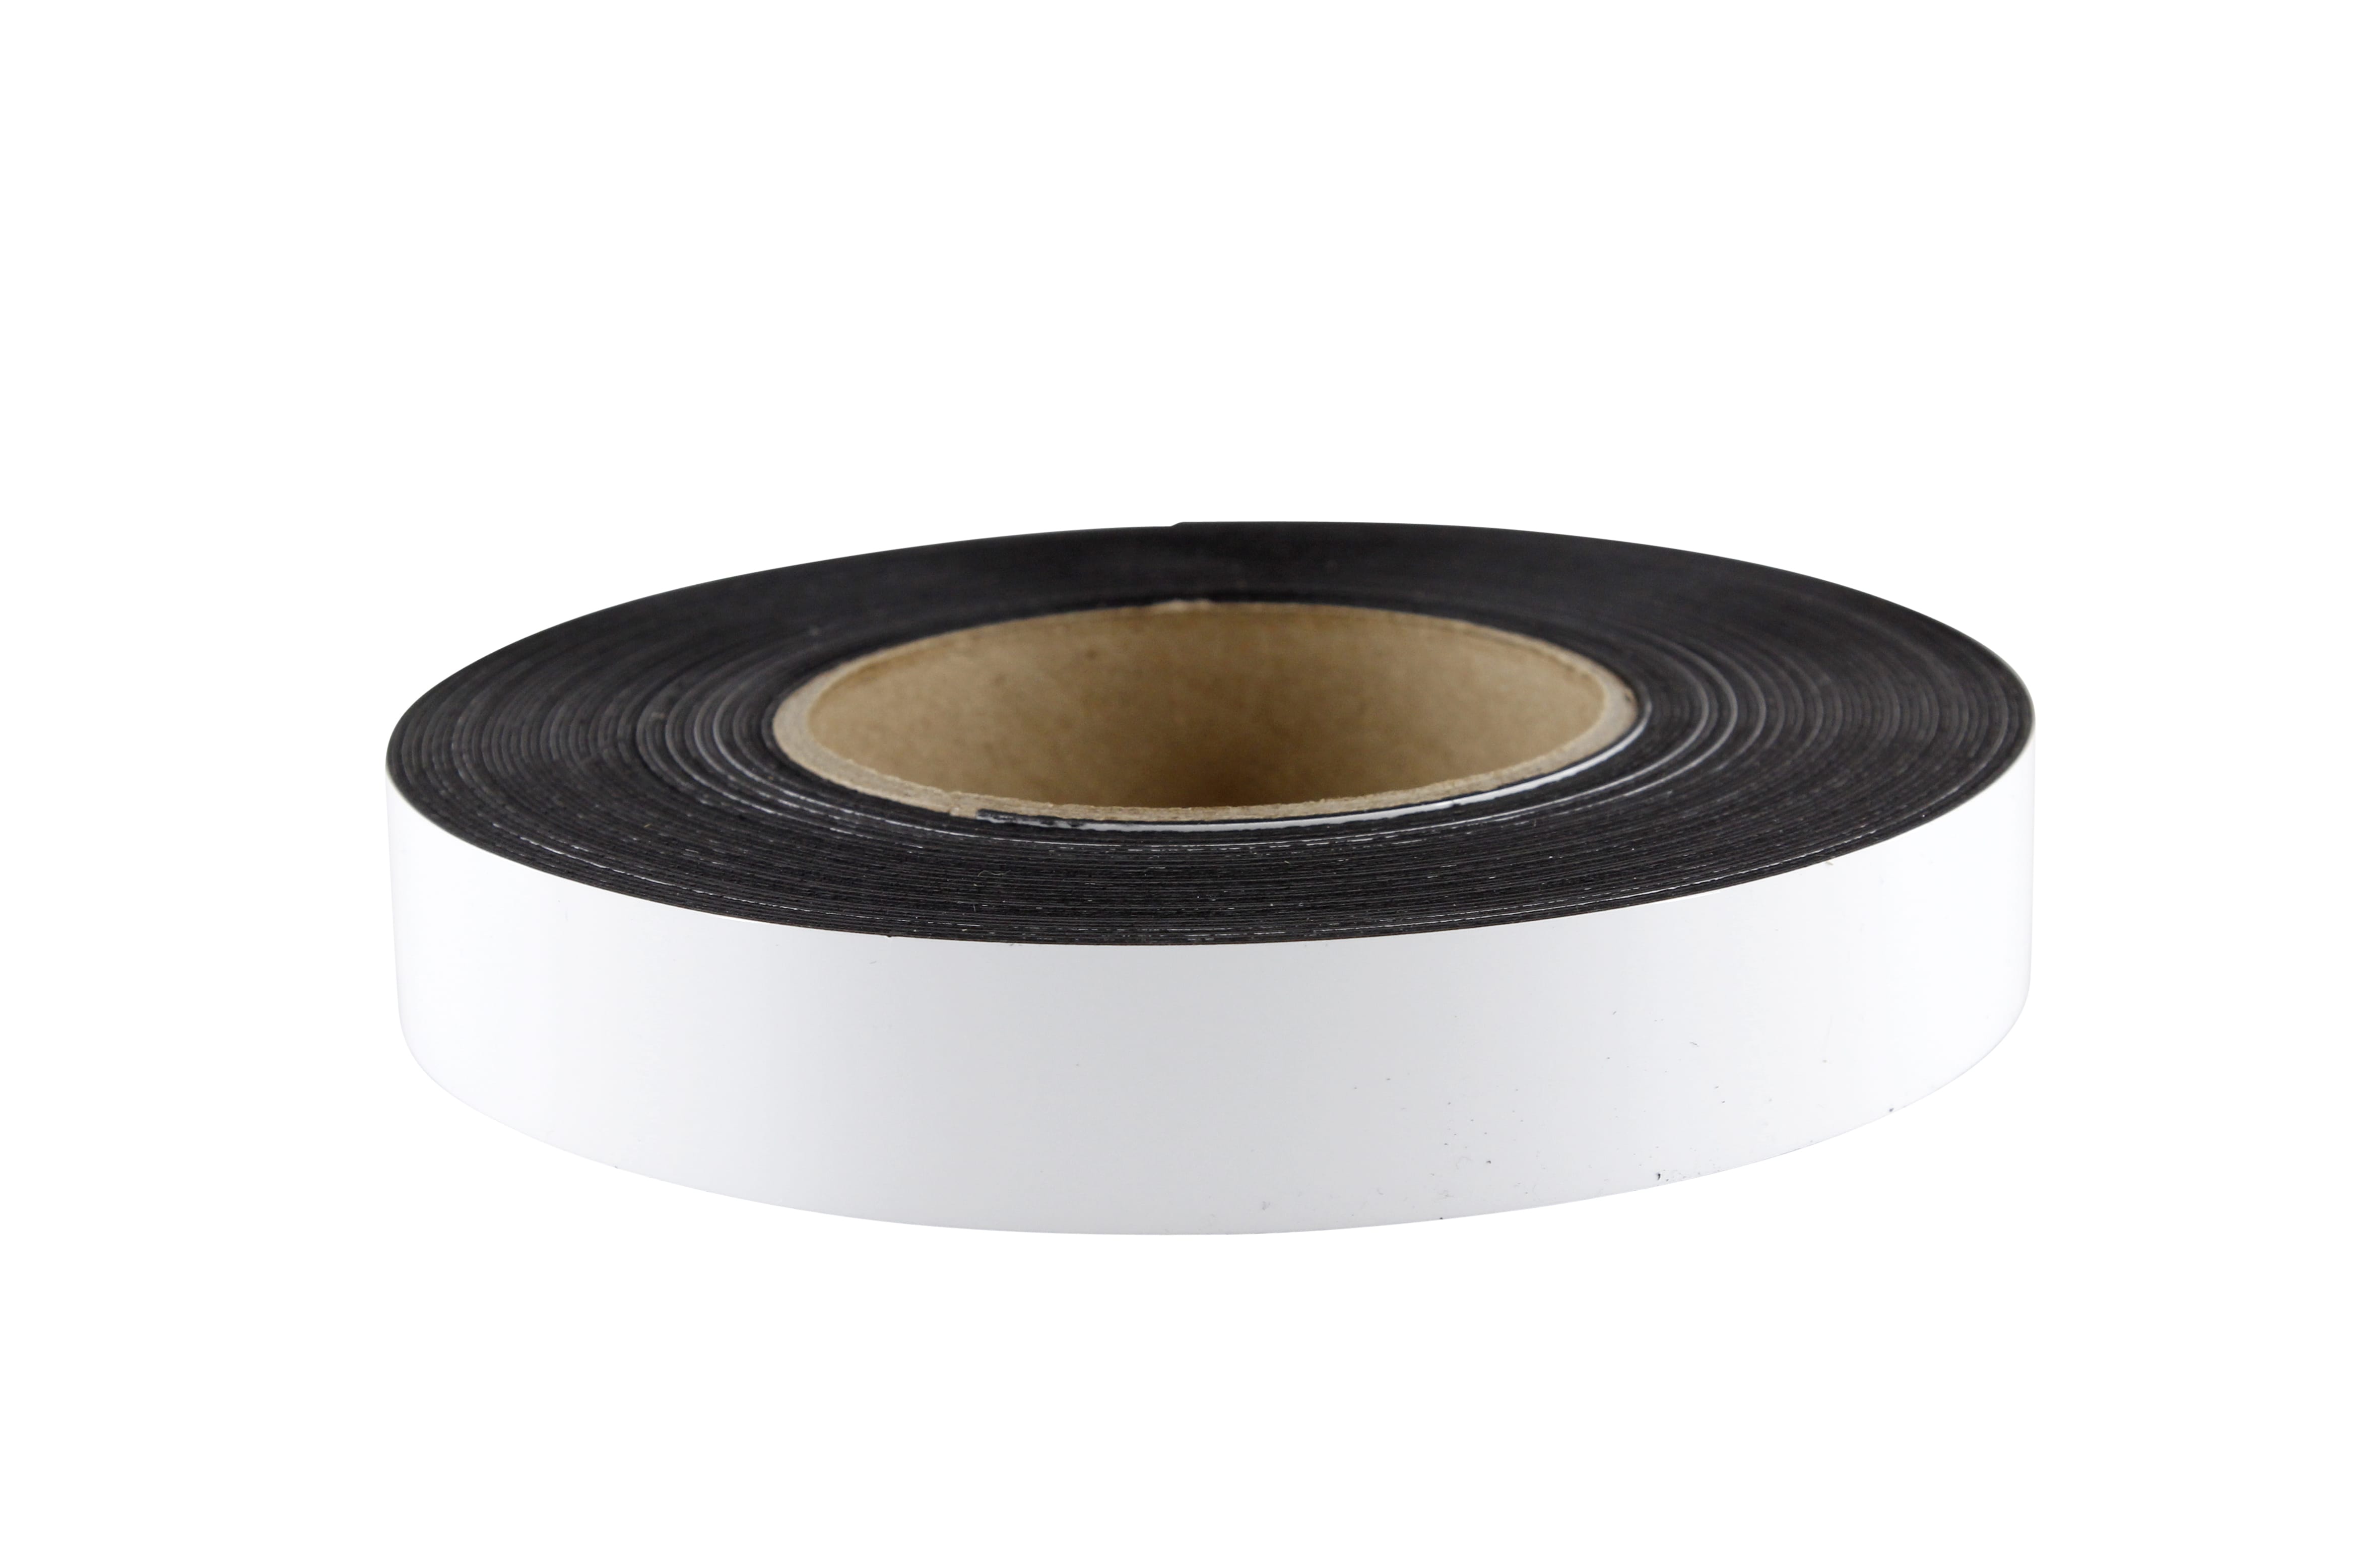 Zeus Adhesive-Backed Magnetic Tape, 1/2 x 10ft, Roll - Black